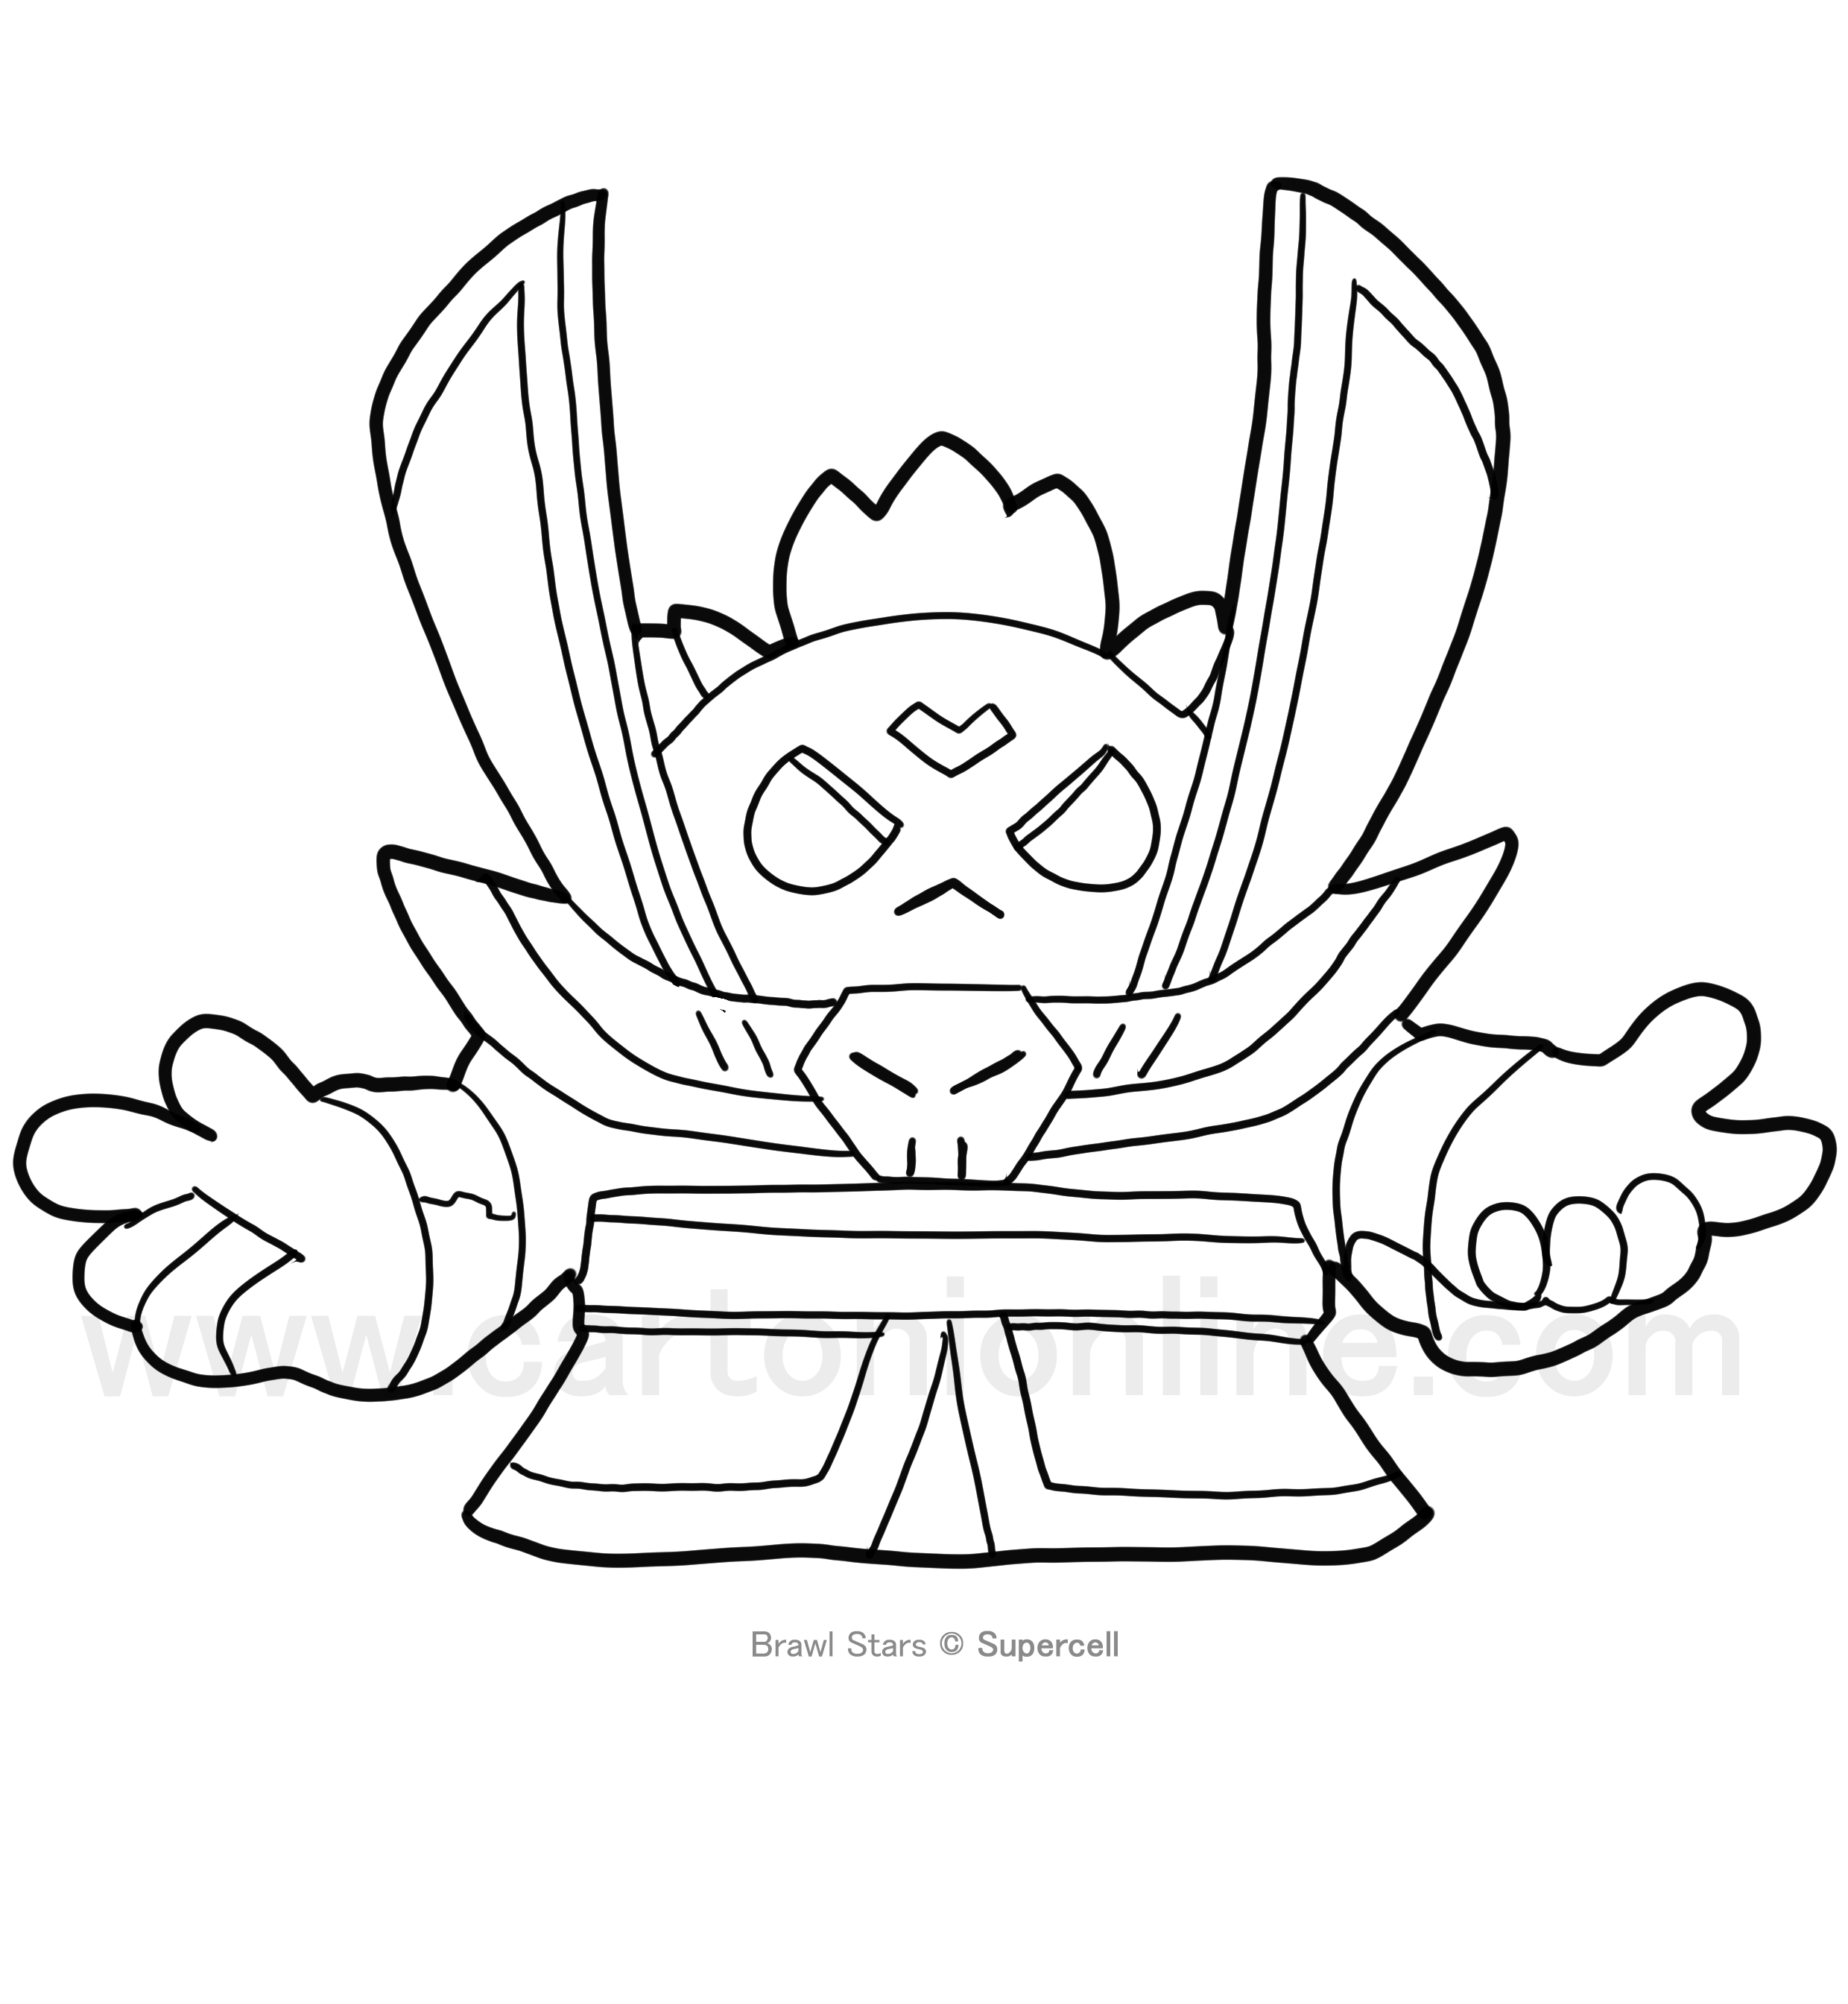 Dark Lord Spike from Brawl Stars coloring page to print and coloring